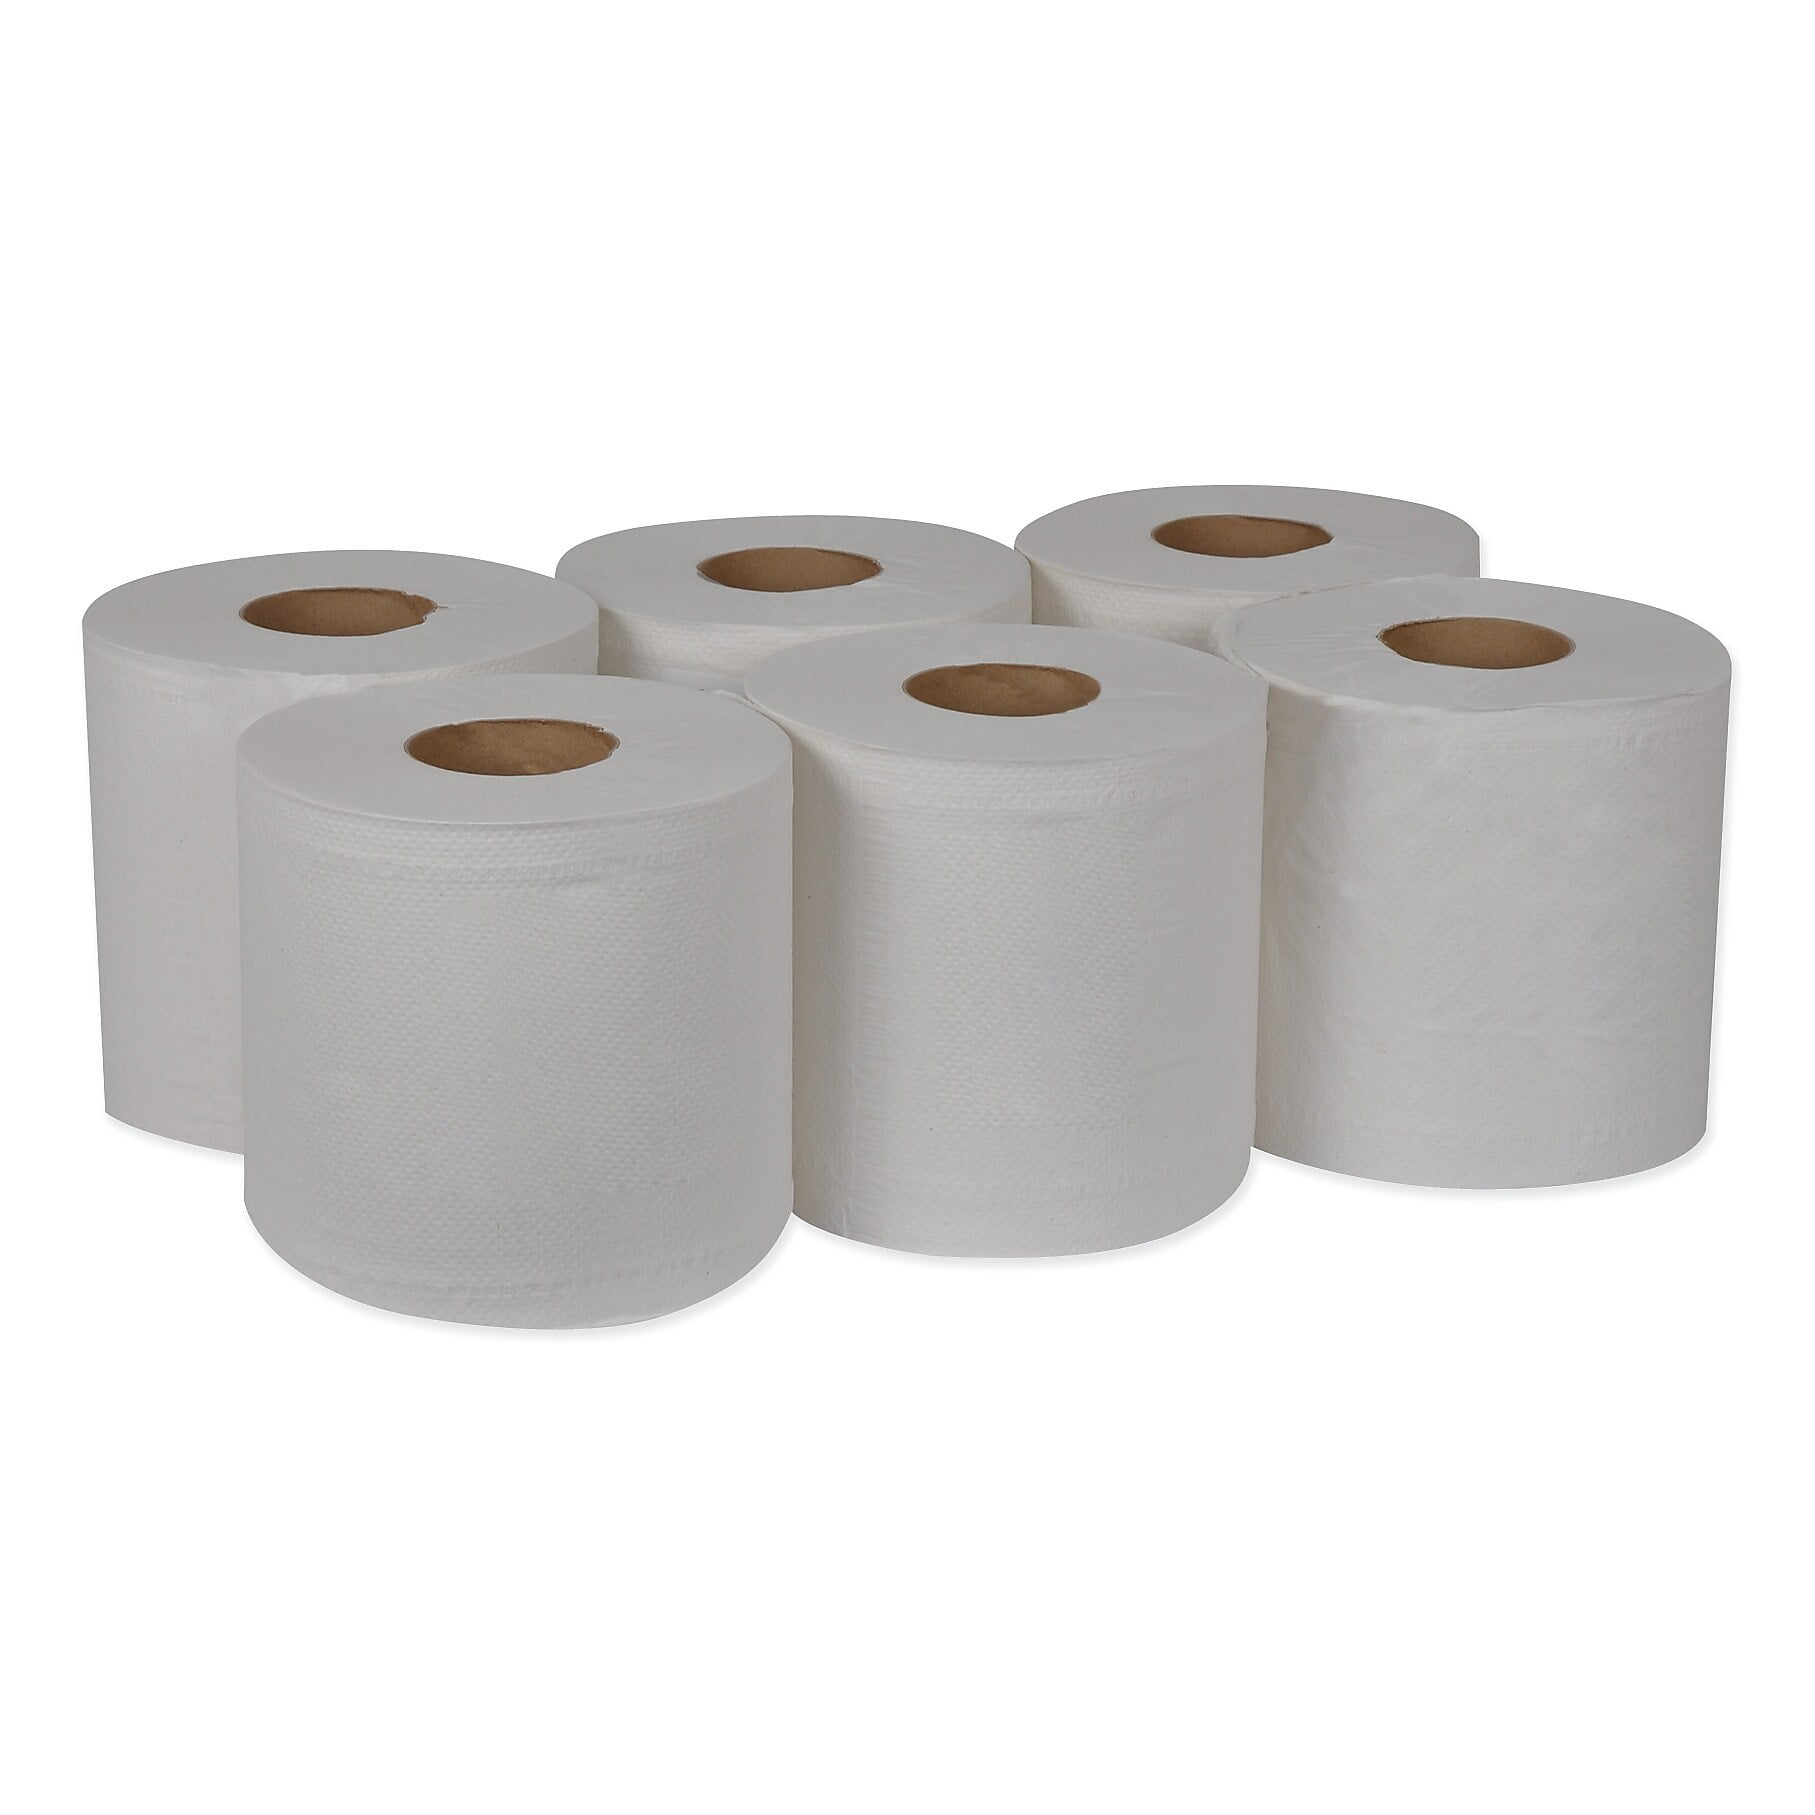 Details about   Tork Universal RC530 Centerfeed Paper Hand Towel Roll 7.6" Width x White 2-Ply 